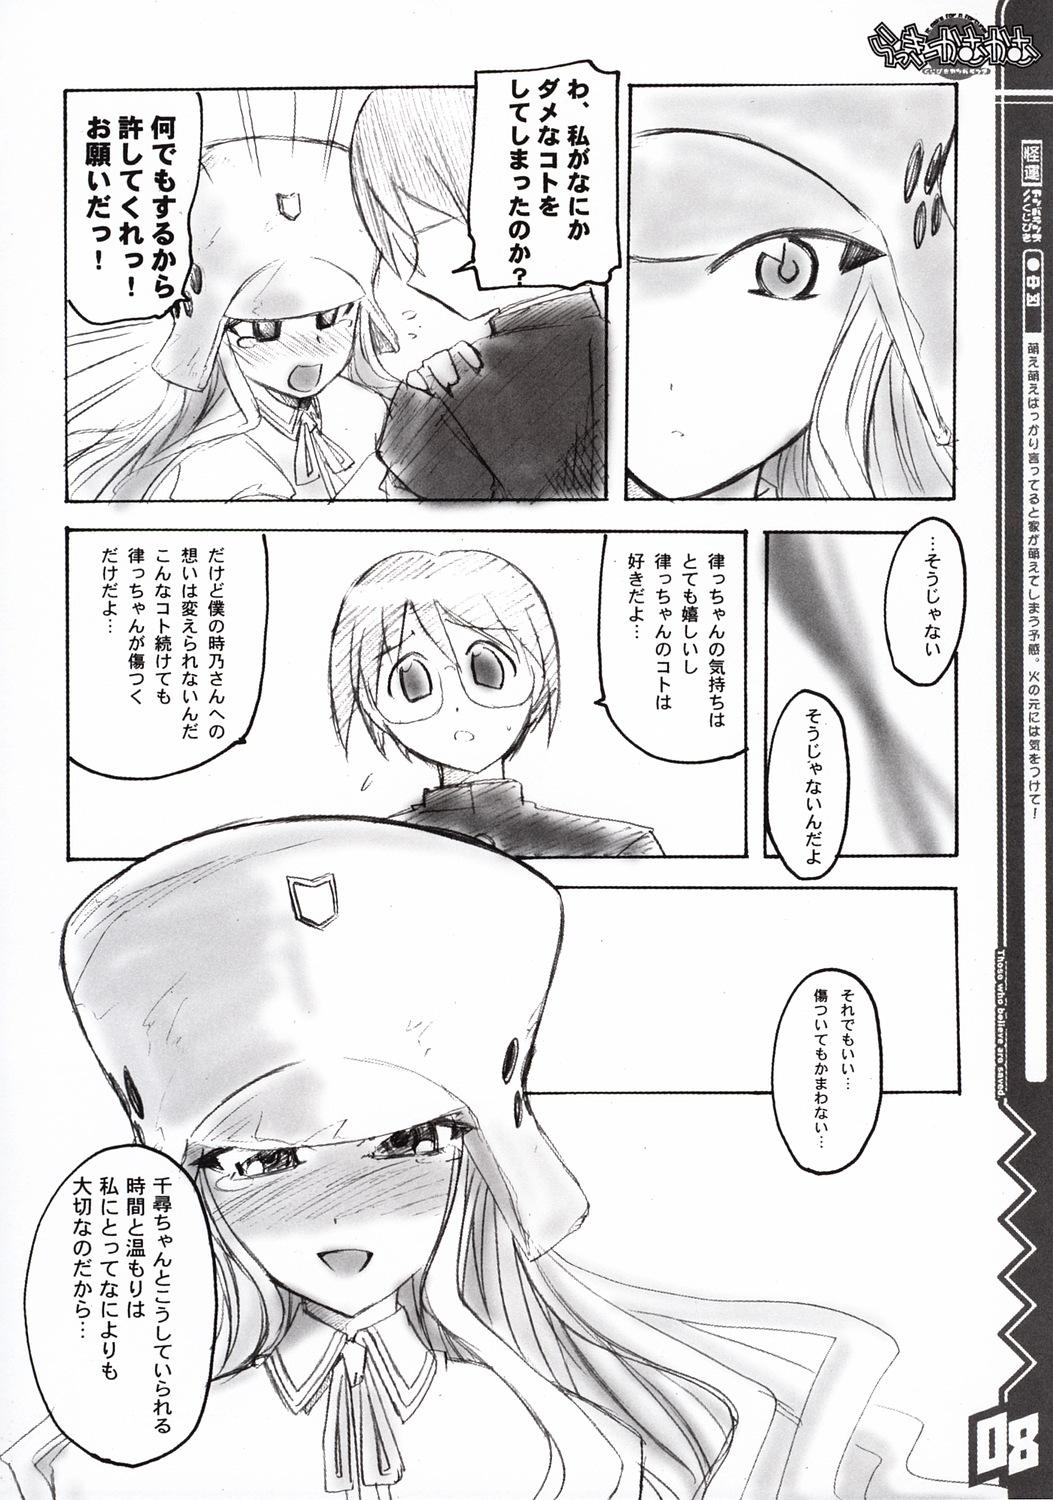 Old Vs Young Lucky Come Come - Kujibiki unbalance Gay Shop - Page 9